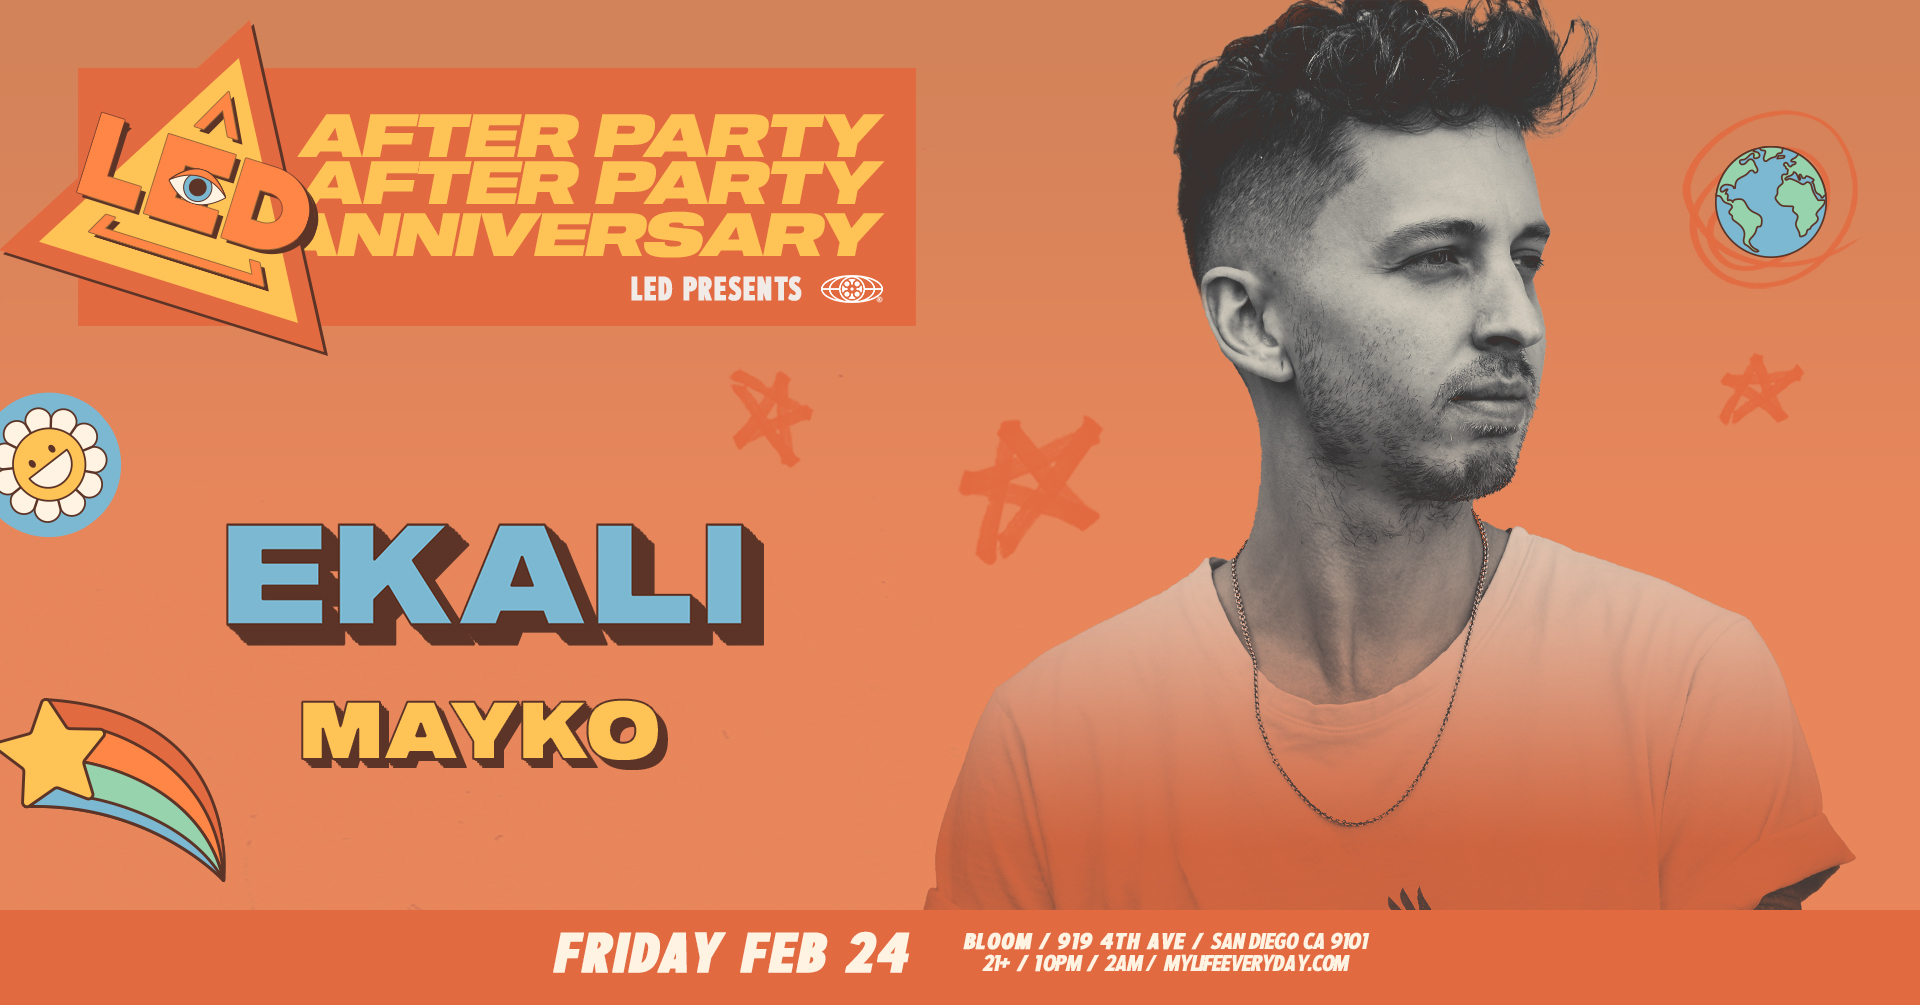 EKALI: LED ANNIVERSARY AFTER PARTY